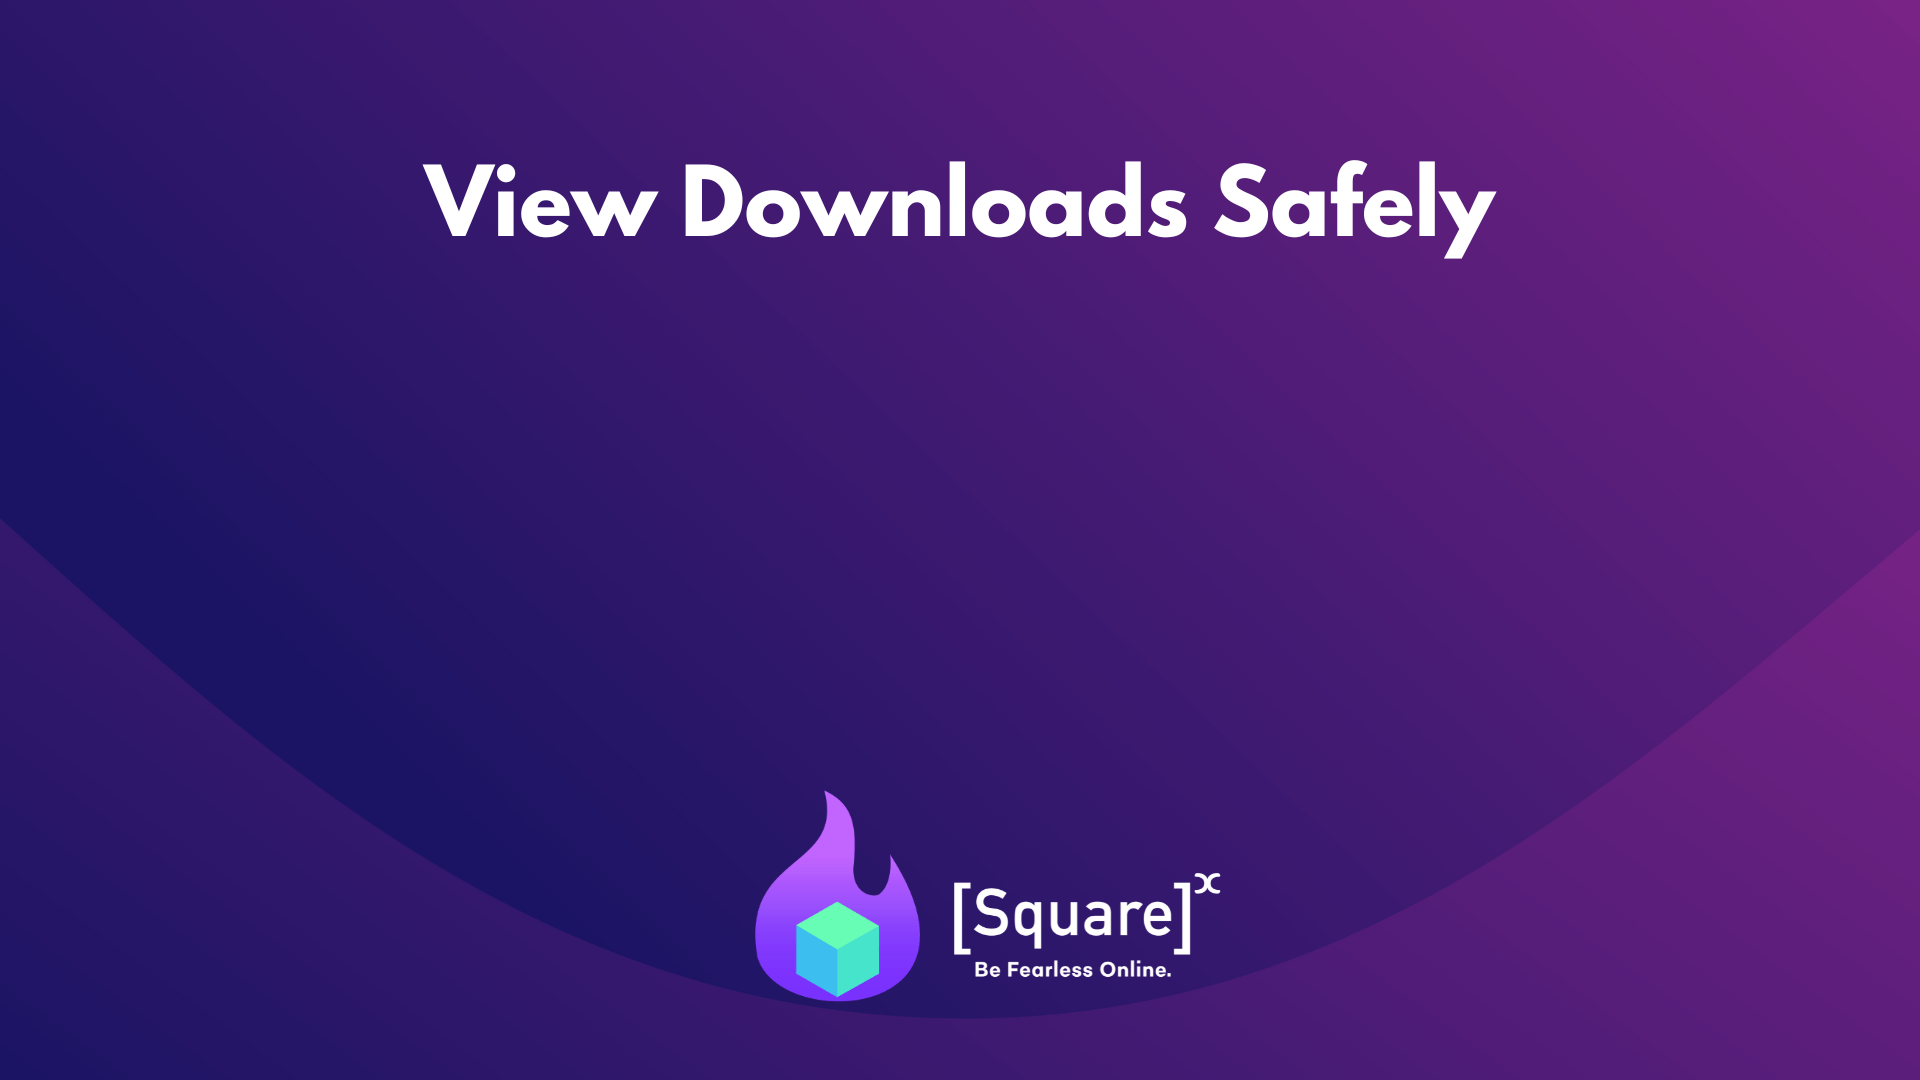 View downloads safely